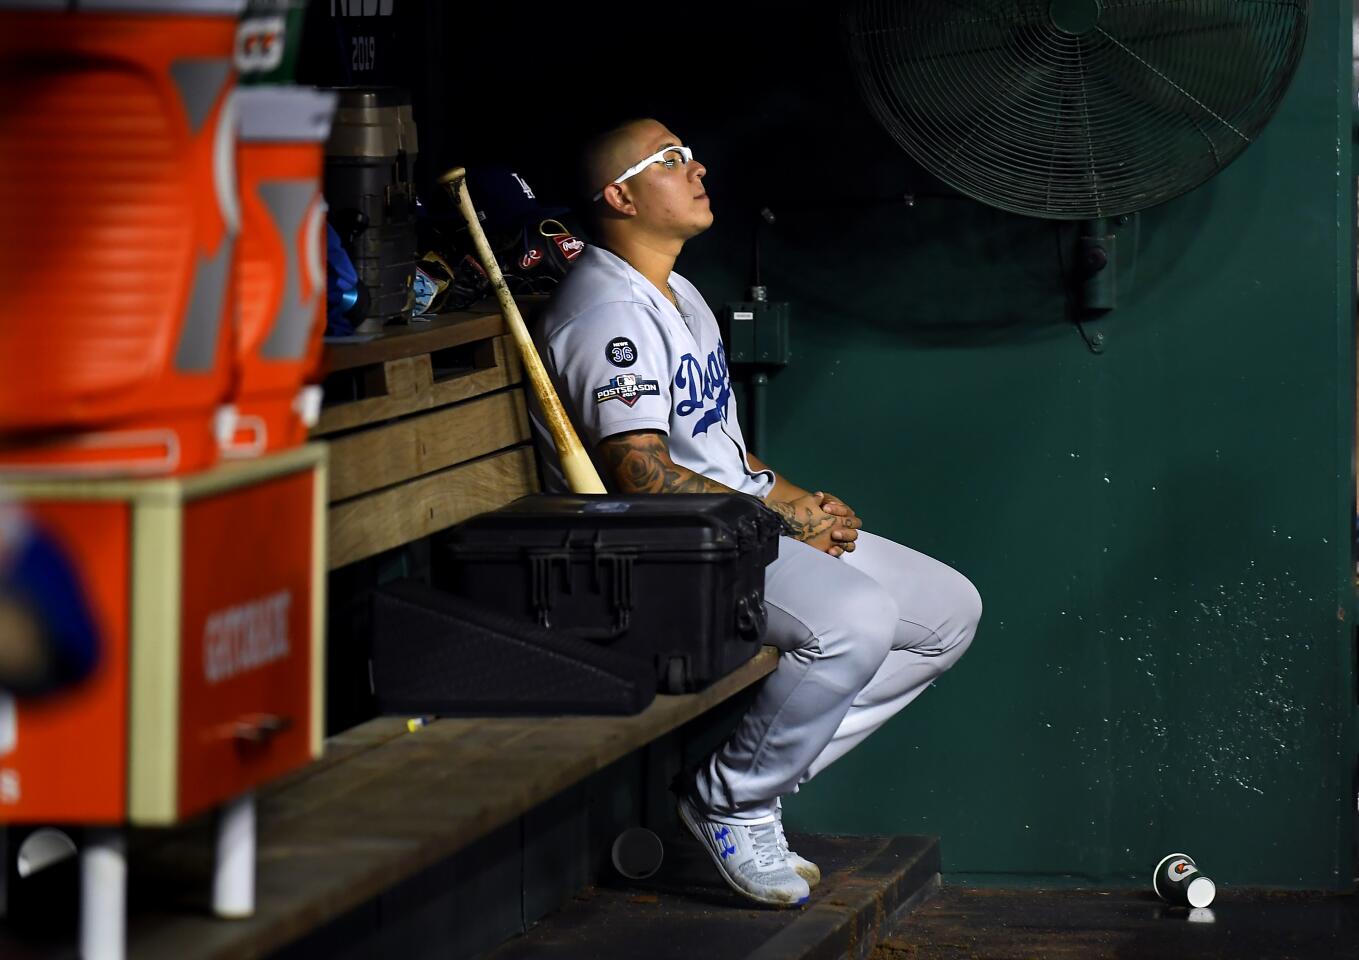 WASHINGTON D.C., OCTOBER 7, 2019-Dodgers relief pitcher Julio Urias sits in the dugout alone after giving up three runs against the Nationals in Game 4 of the NLDS at Nationals Stadium Monday. (Wally Skalij/Los Angeles Times)